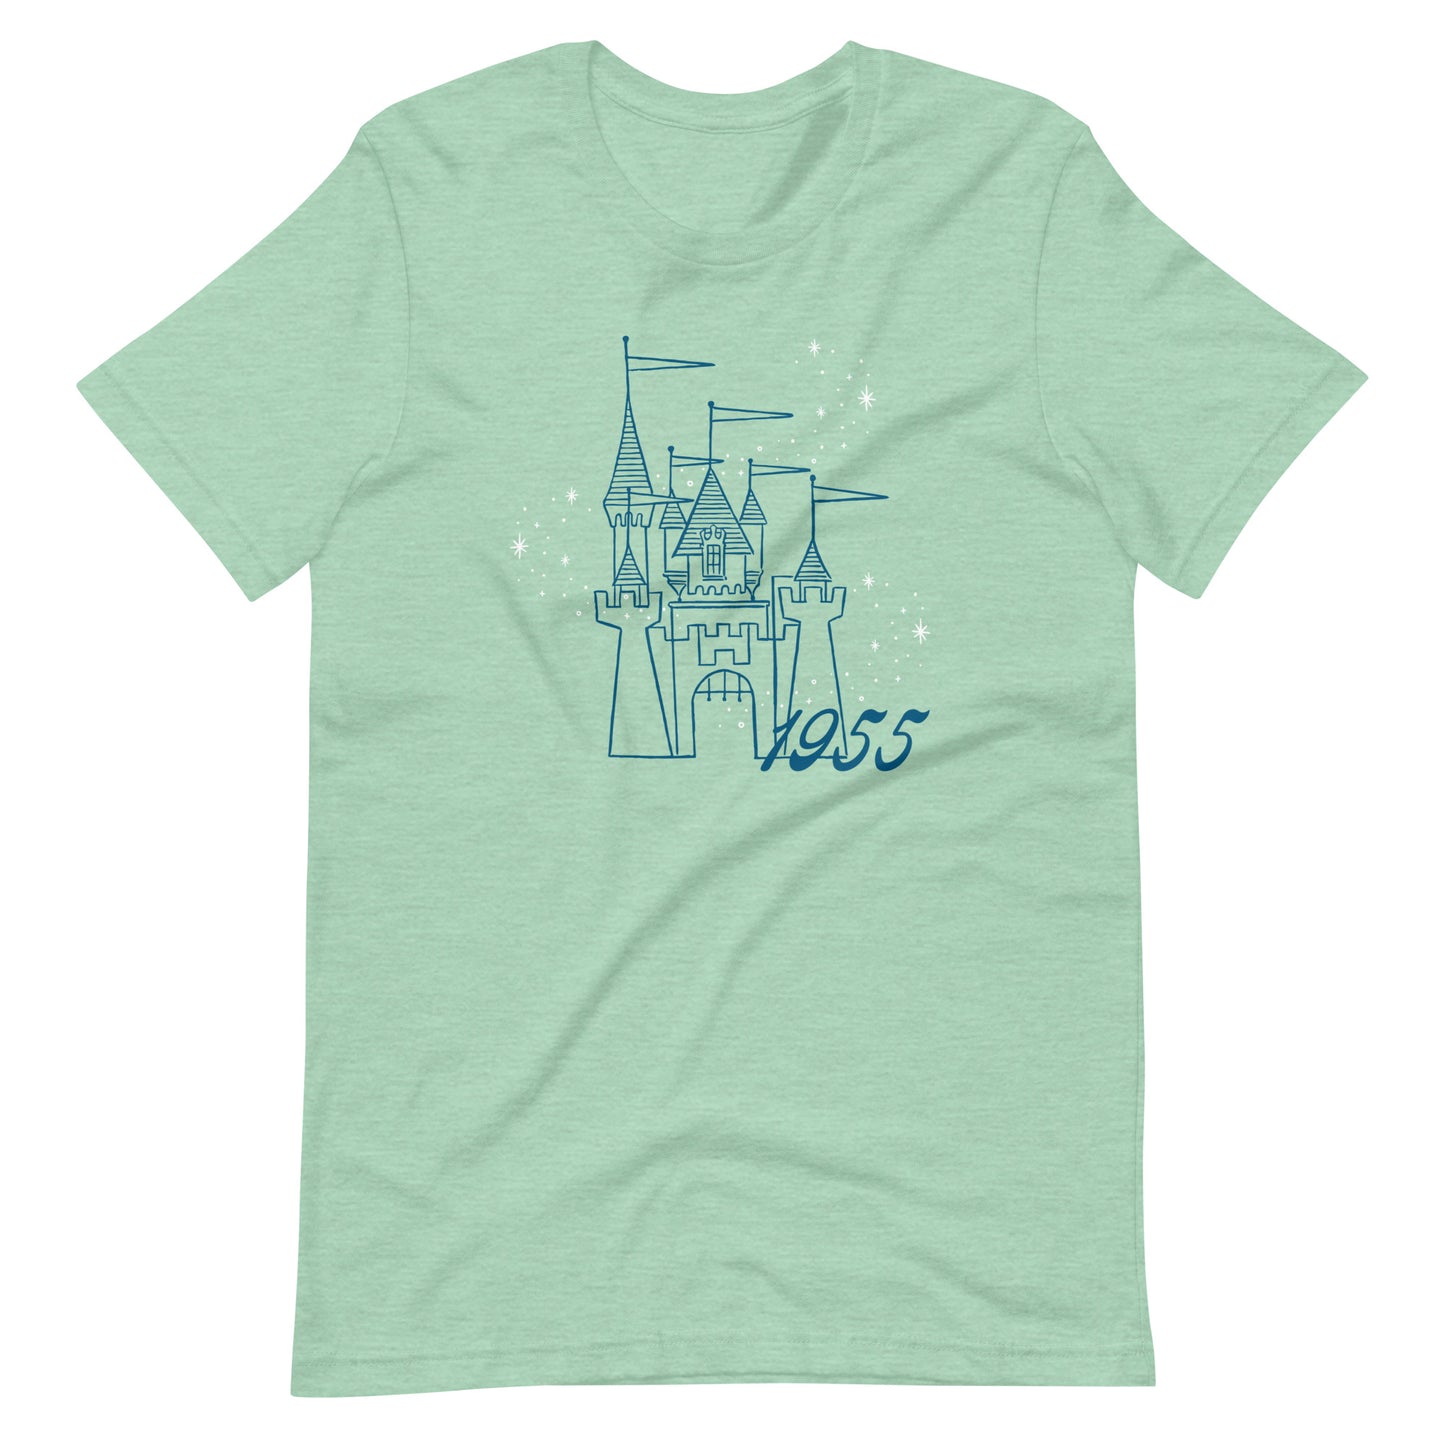 Mint green t-shirt printed with vintage style sketch of the Disneyland Castle with the year 1955 and pixie dust above the castle.